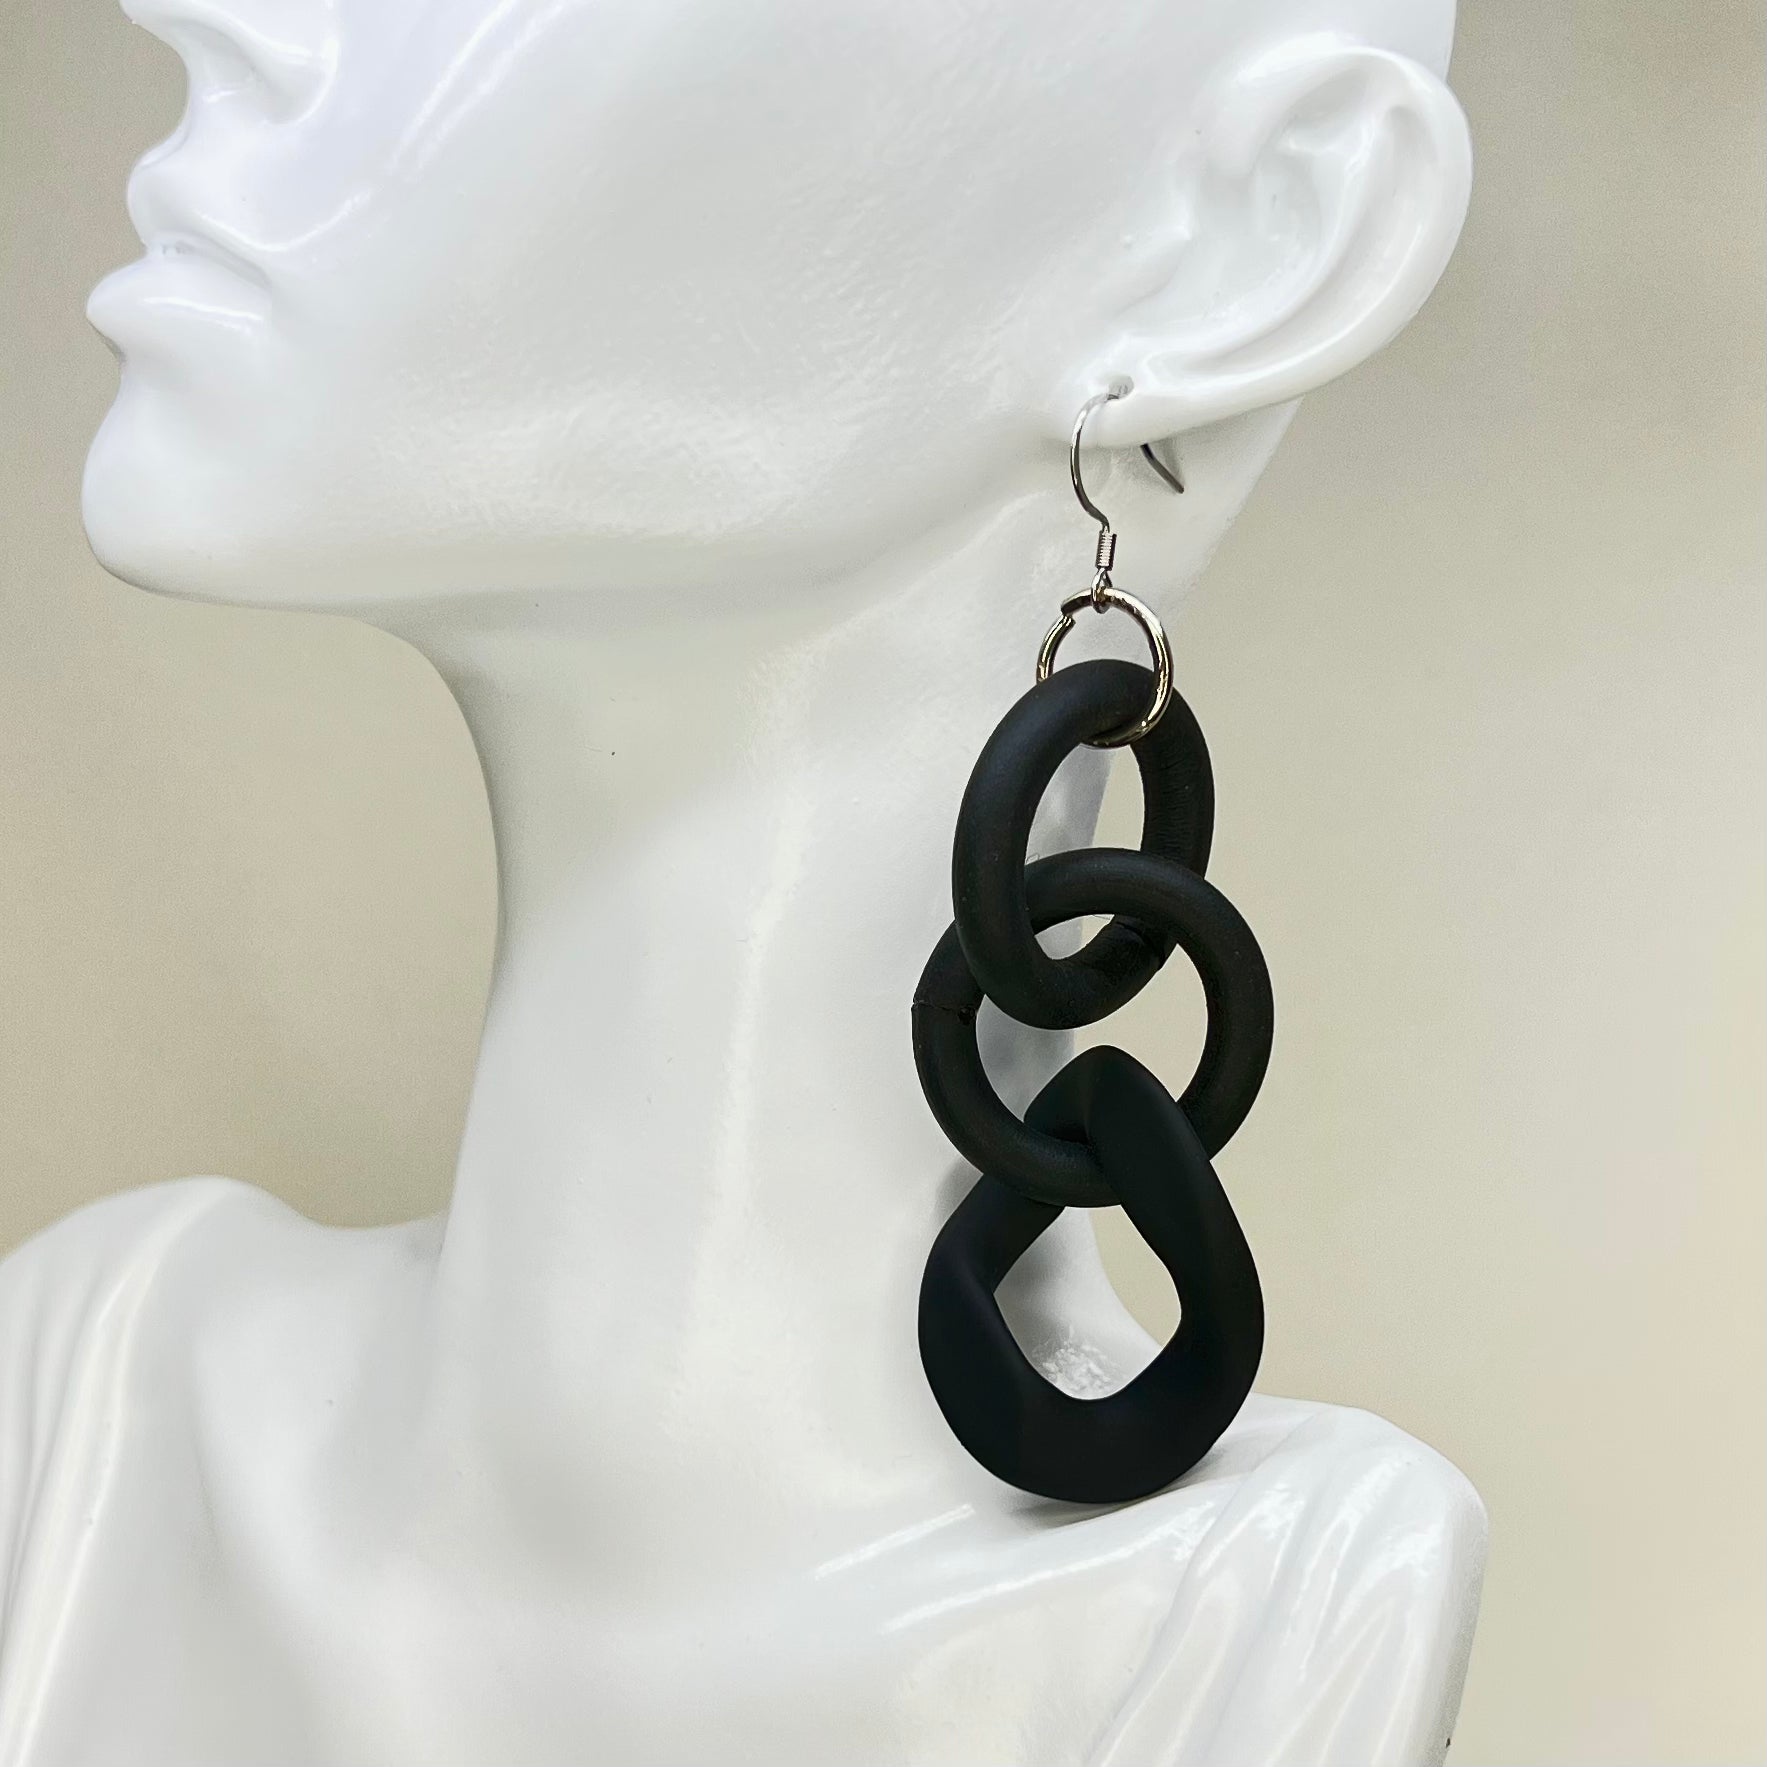 Rubber Ring Earrings with Plastic Chain Link (Assorted Colors)